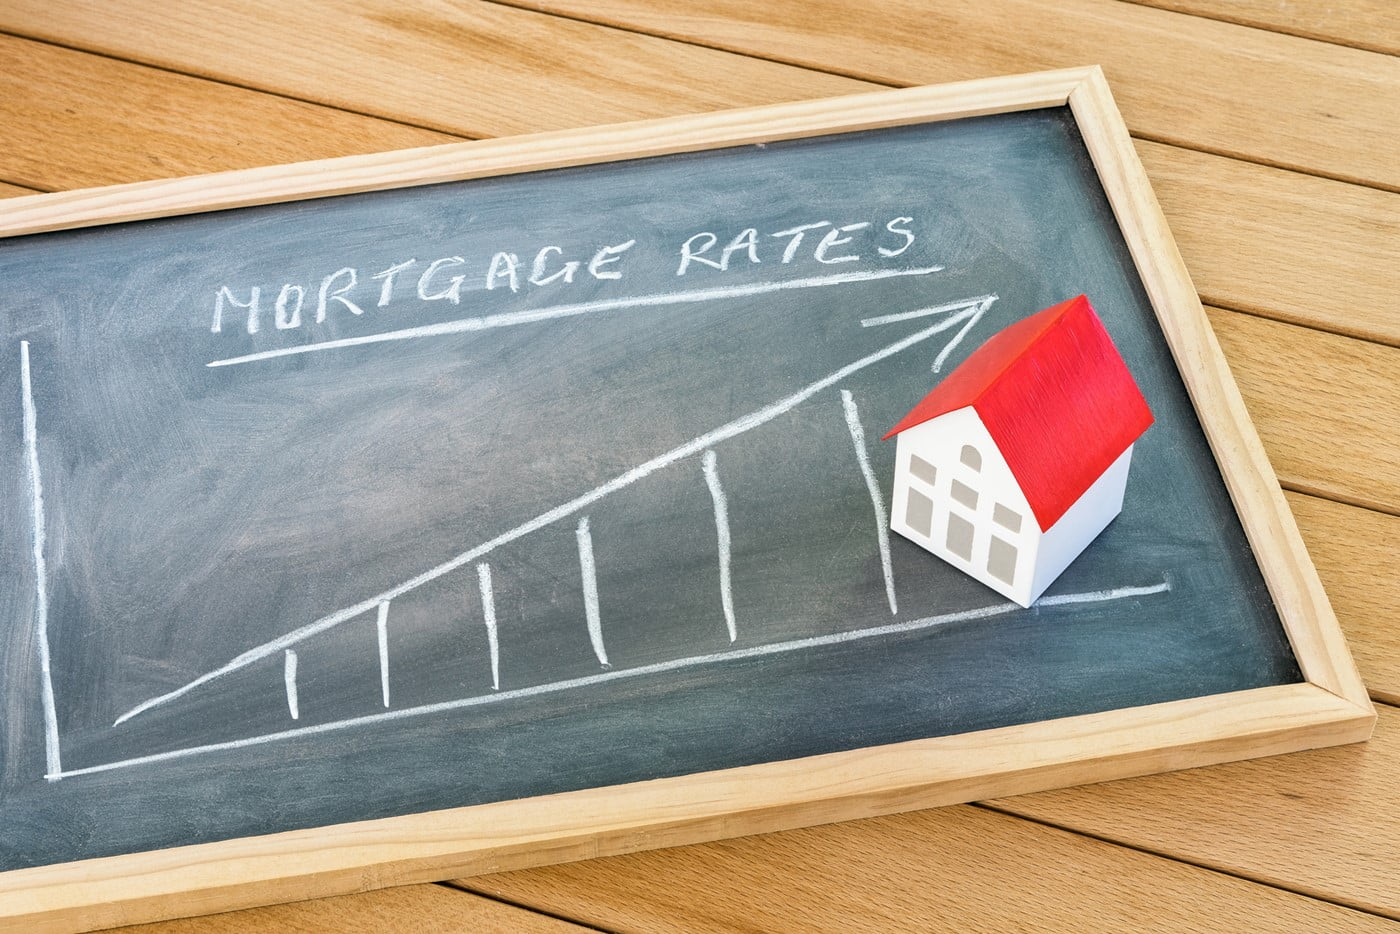 Fixed mortgage rates back on the rise